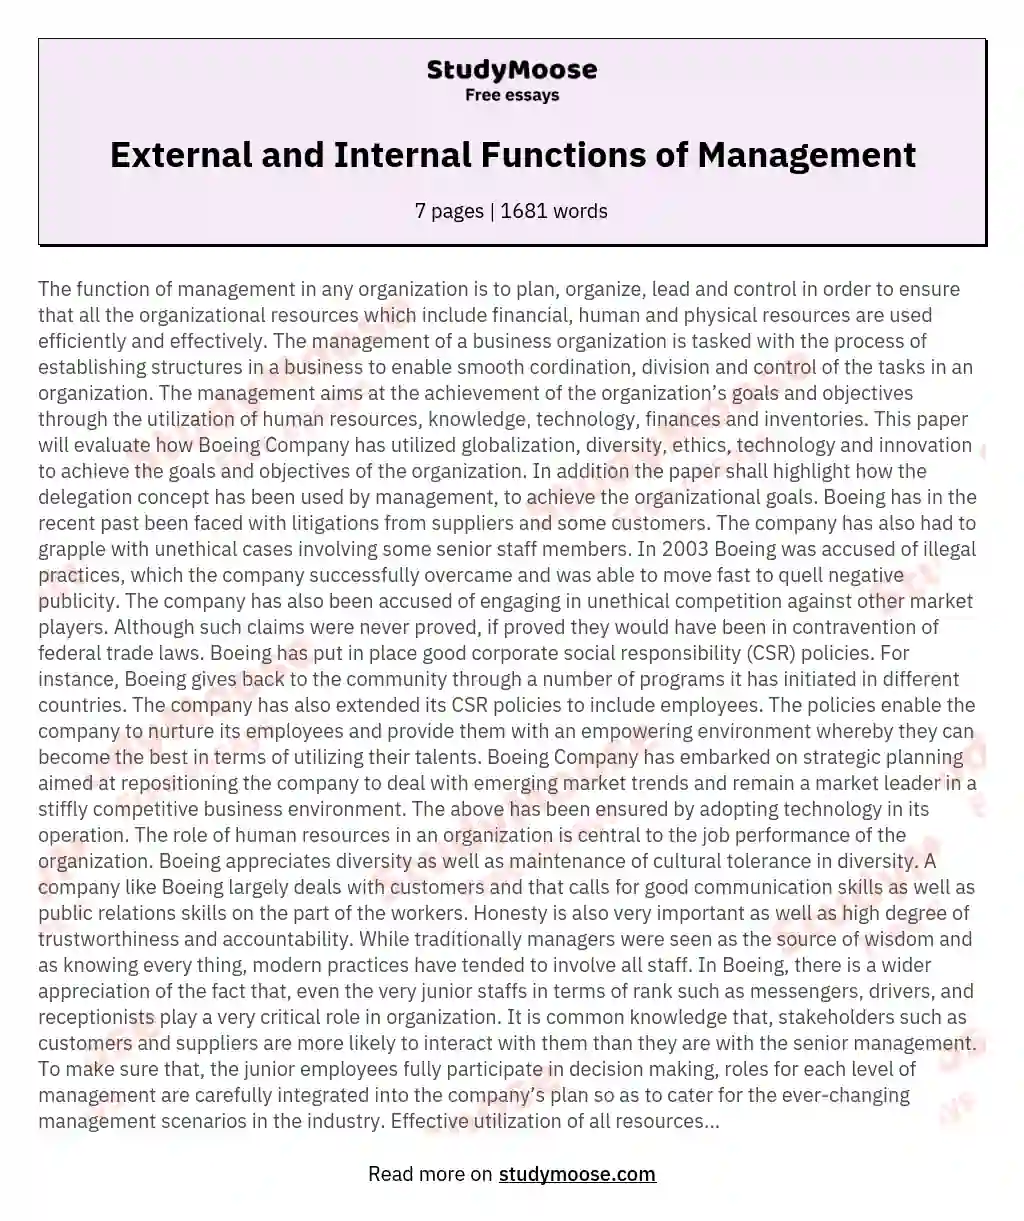 External and Internal Functions of Management